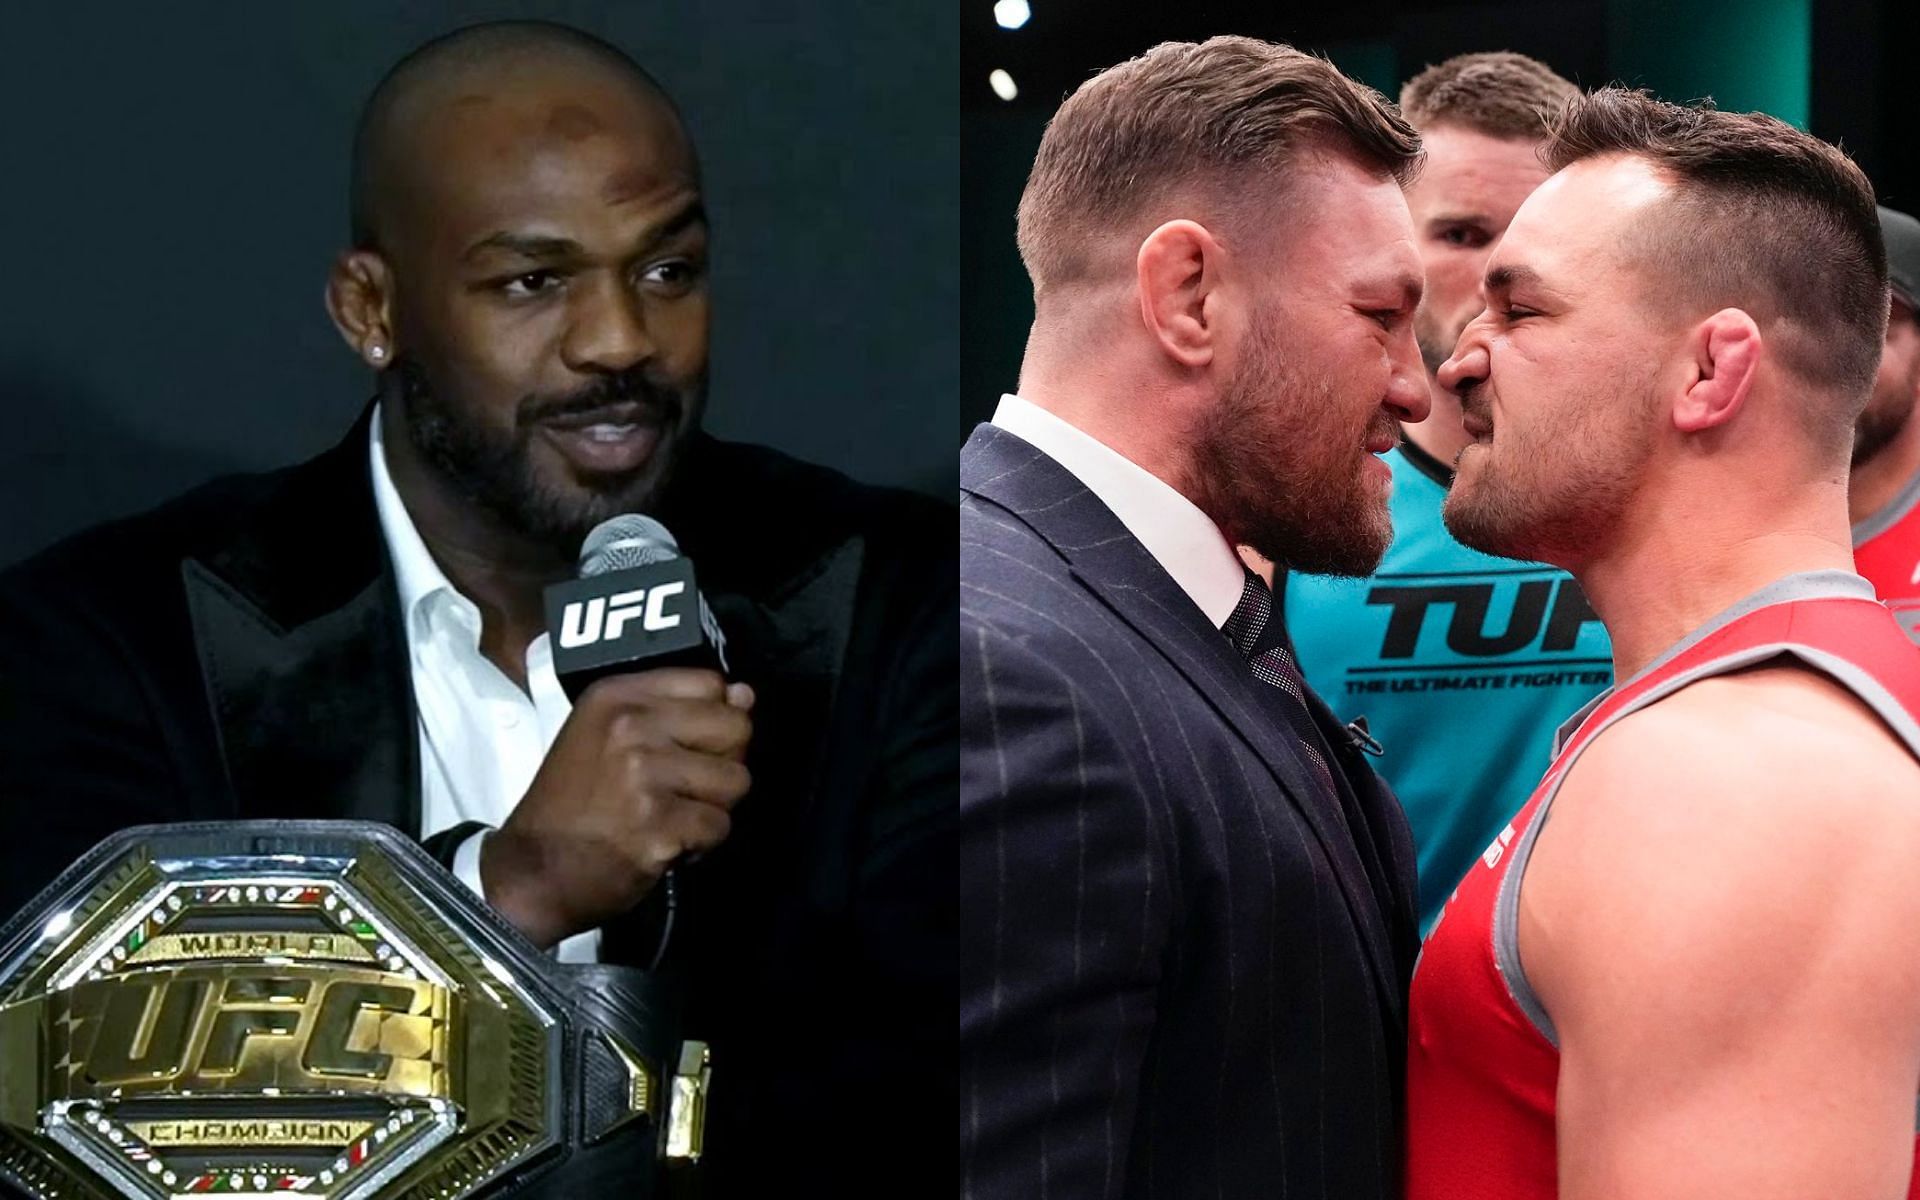 Jon Jones (left) and Conor McGregor and Michael Chandler (right). [via UFC and Getty Images]